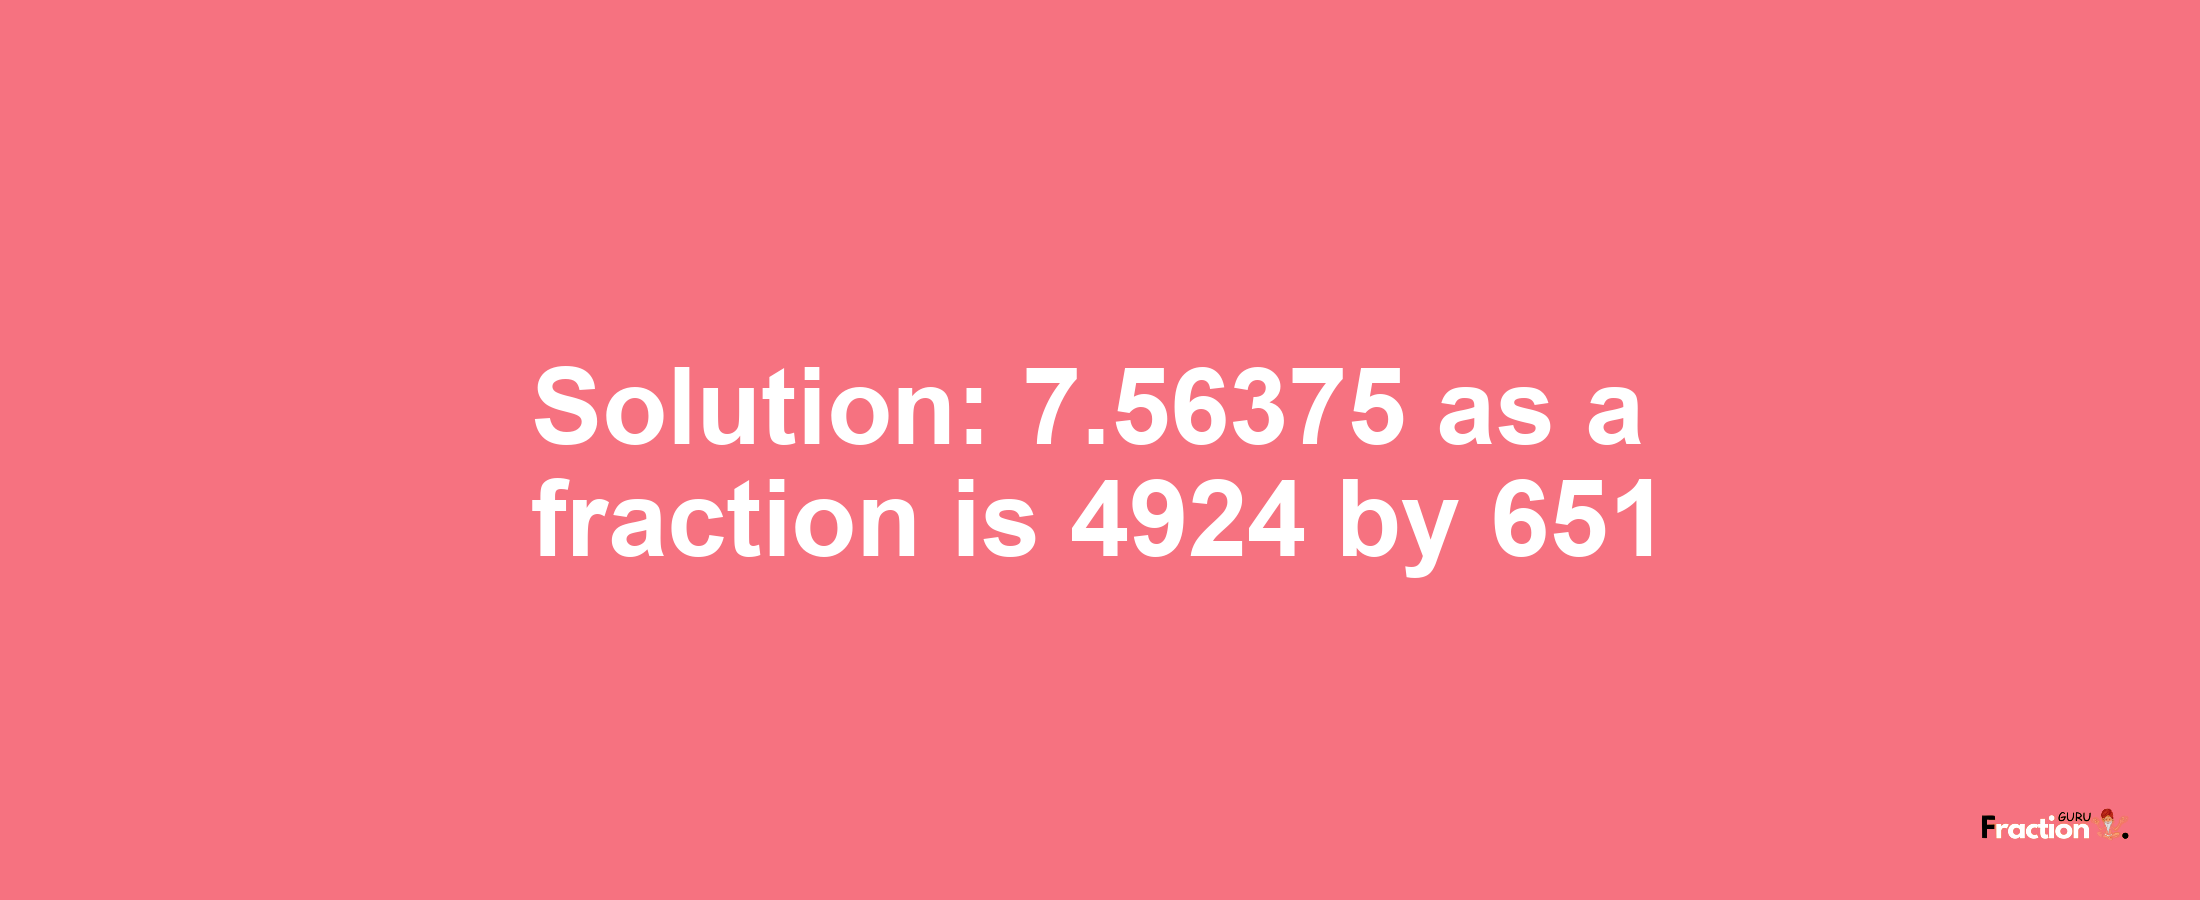 Solution:7.56375 as a fraction is 4924/651